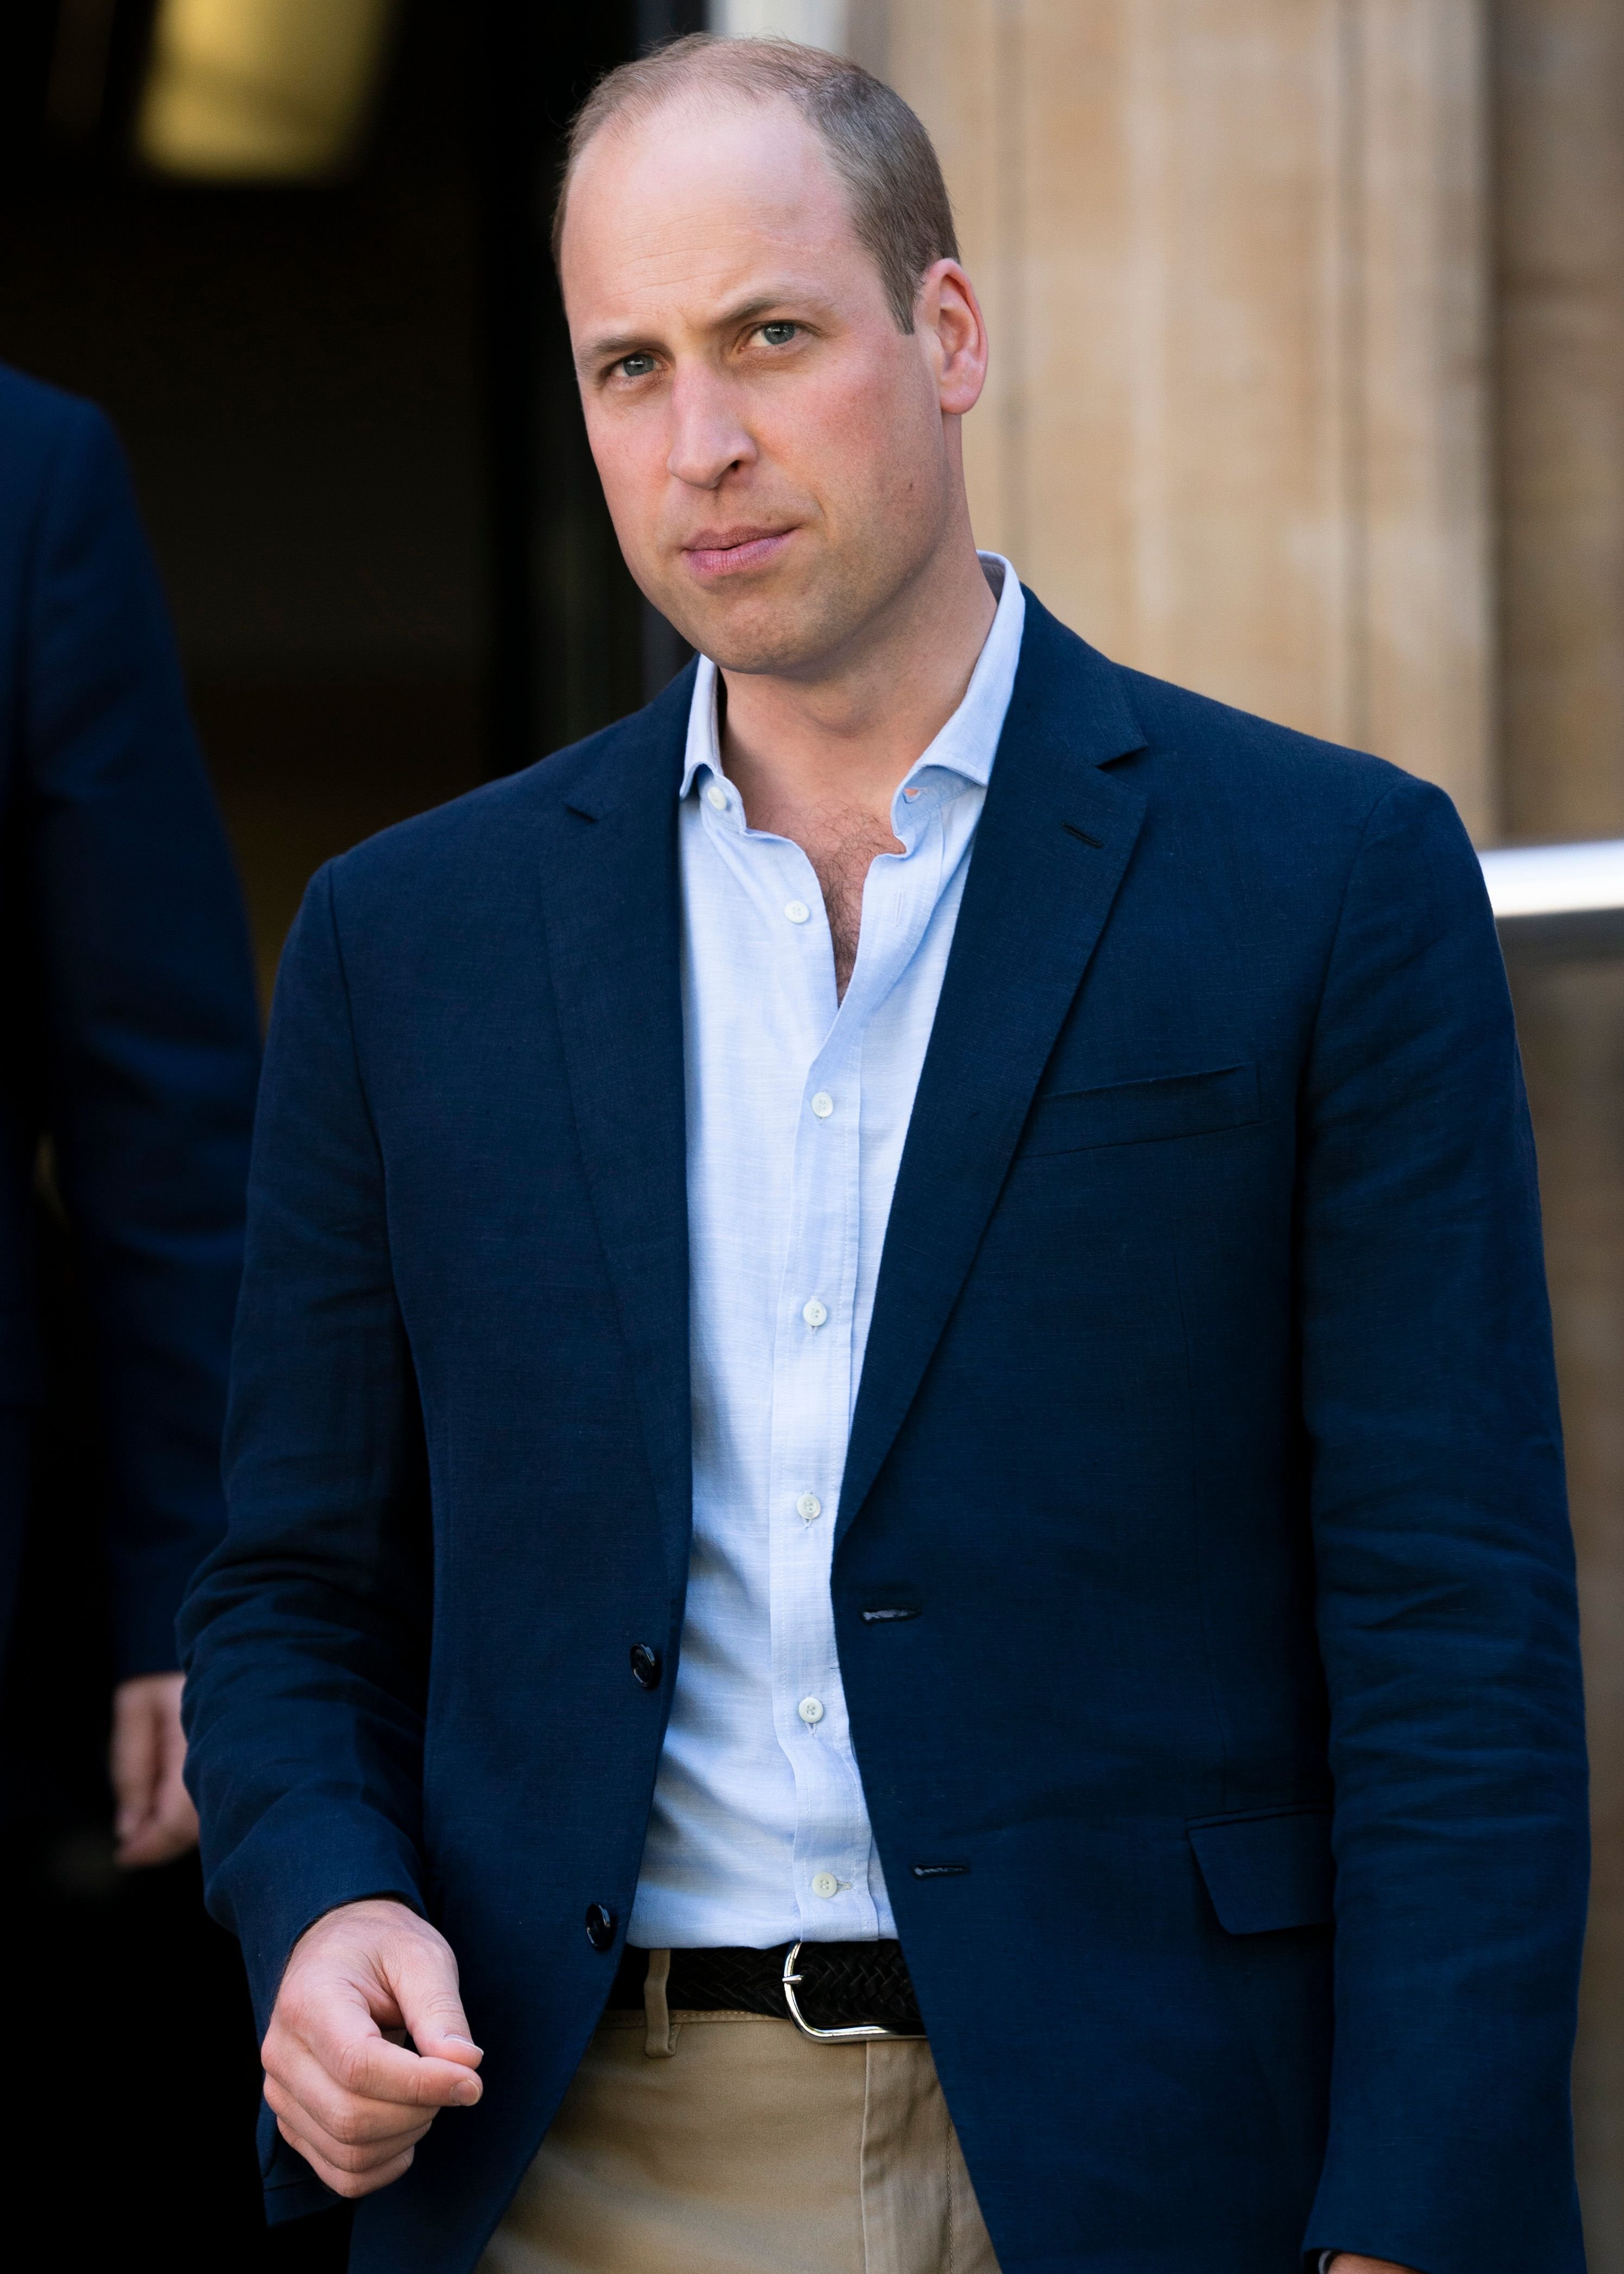 Prince William, Duke of Cambridge at the Royal Marsden on July 04, 2019 | Photo: Getty Images